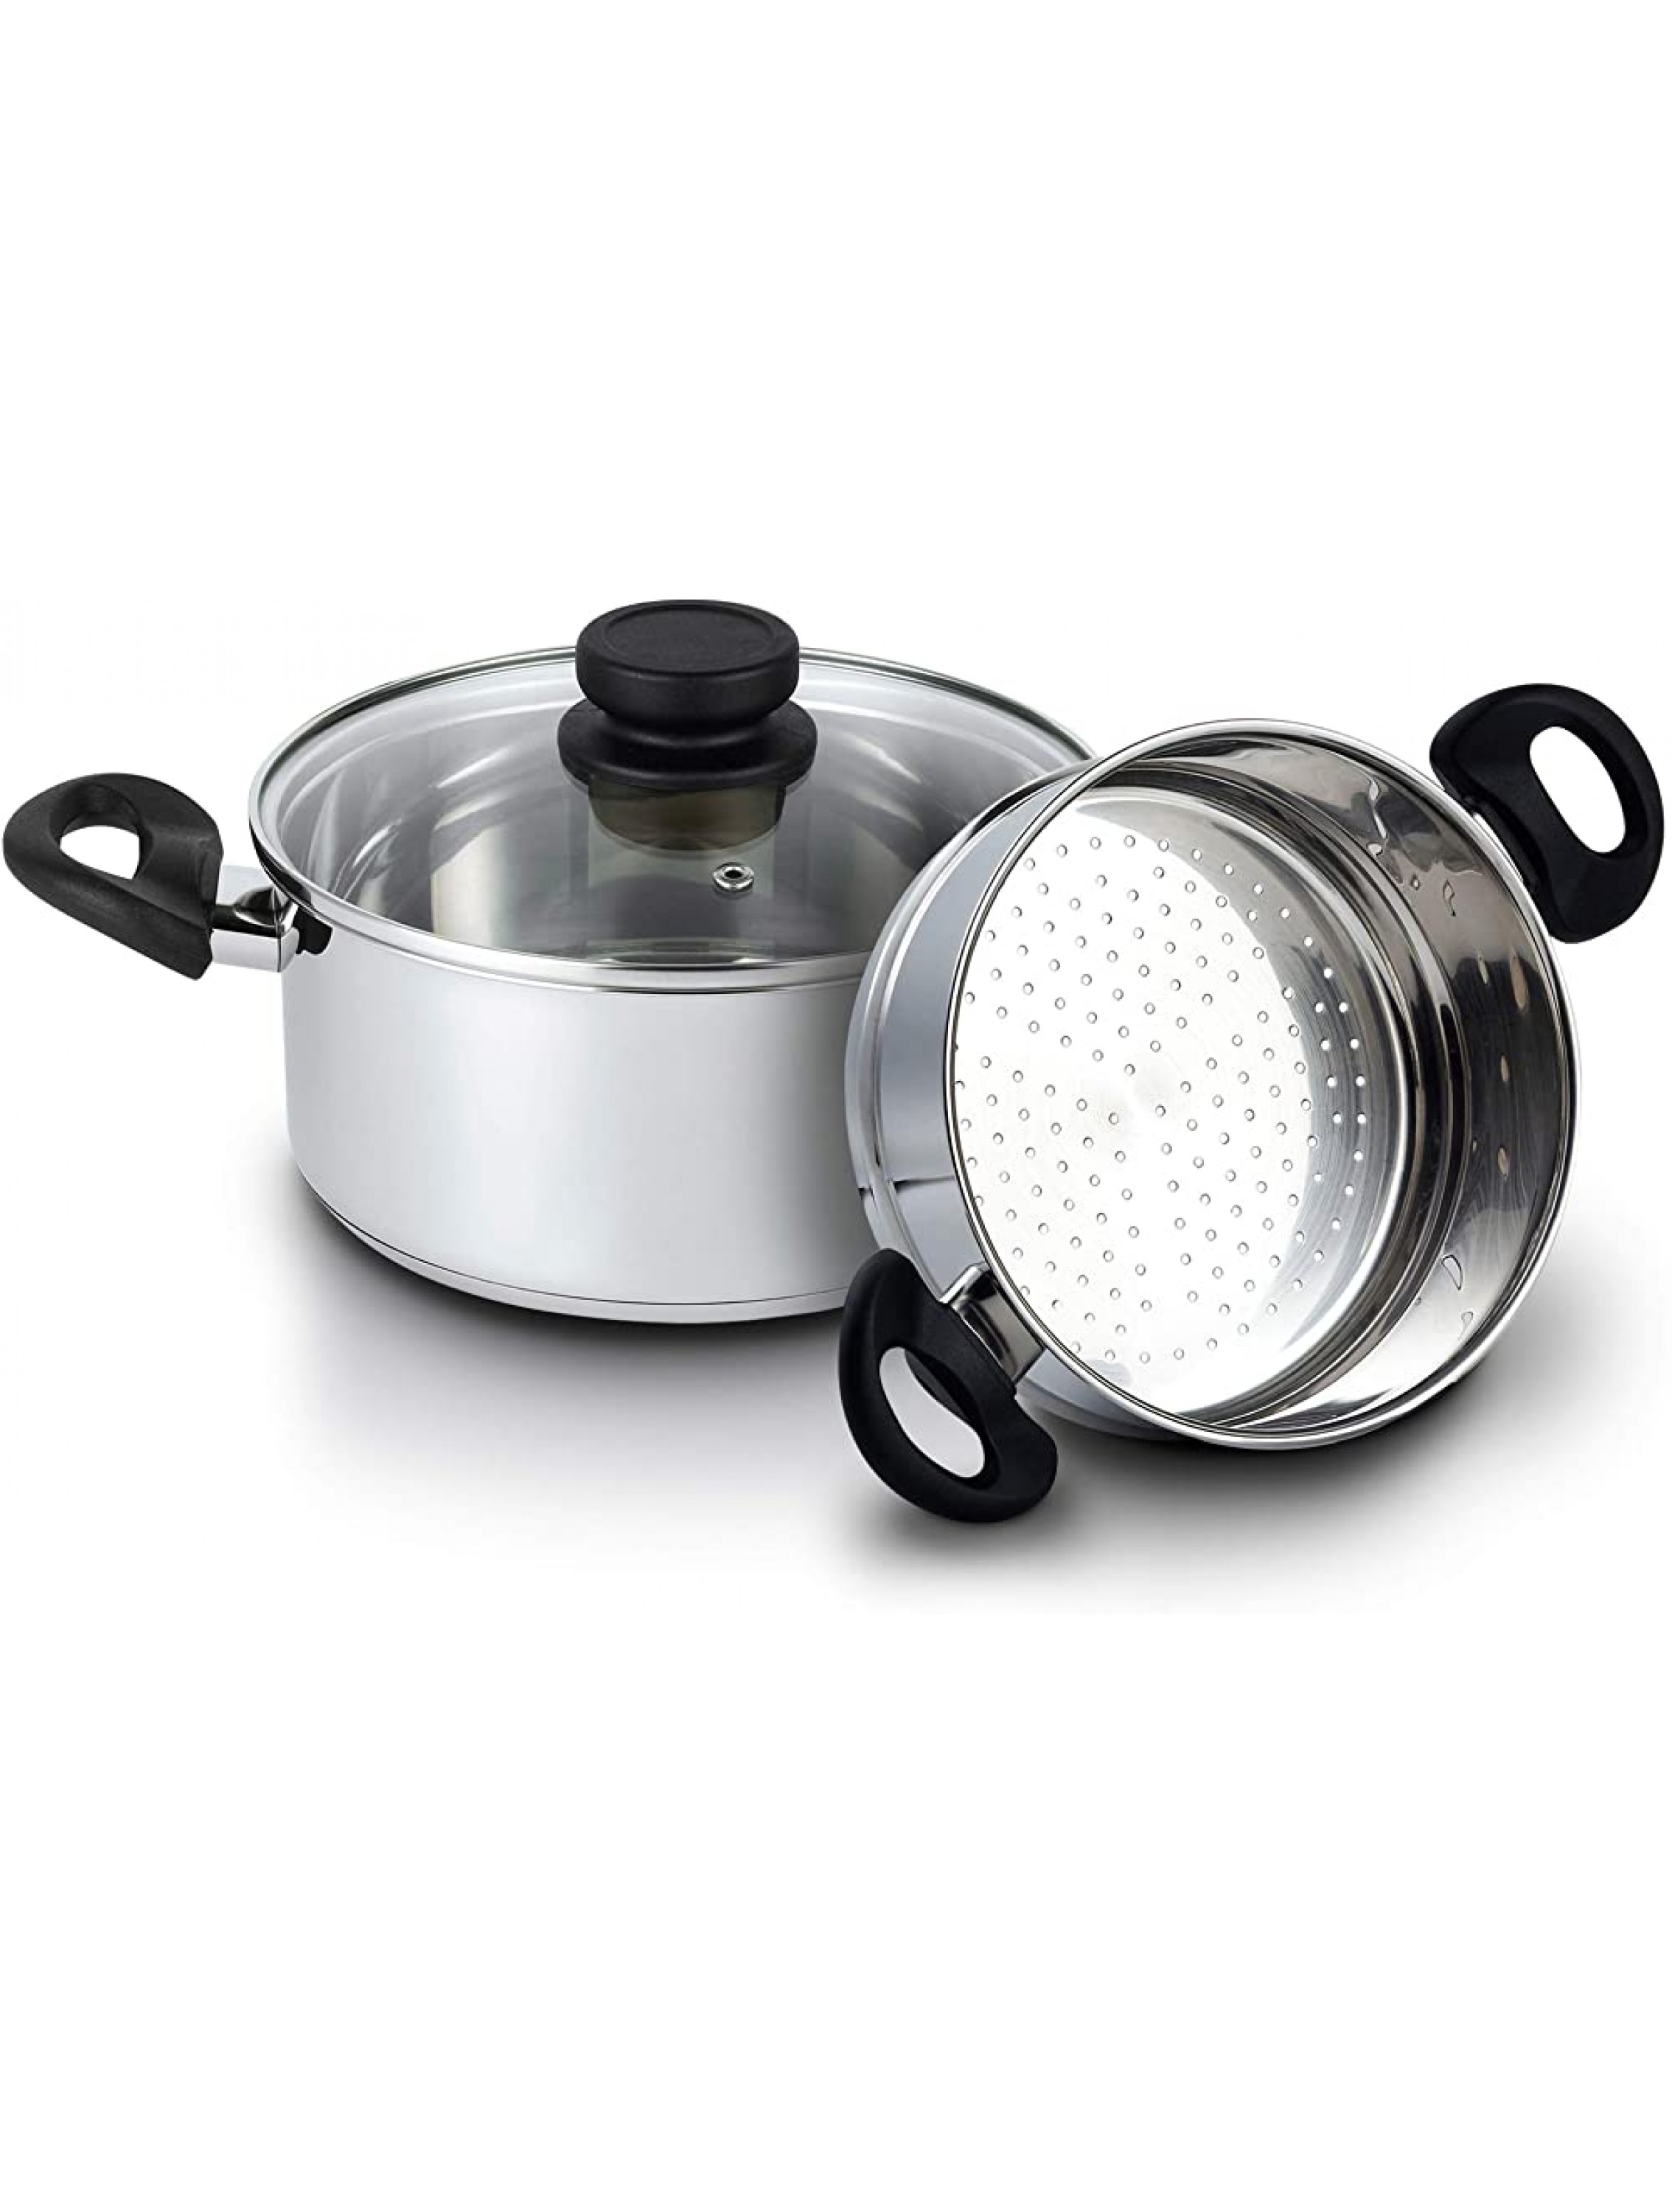 Nevlers Stainless Steel 3 Quart Steamer Pot with 2 Quart Steamer Insert and Glass Vented Lid 3 Piece Set Safe and Durable Great Addition to Every Kitchen - BZGFV75RG